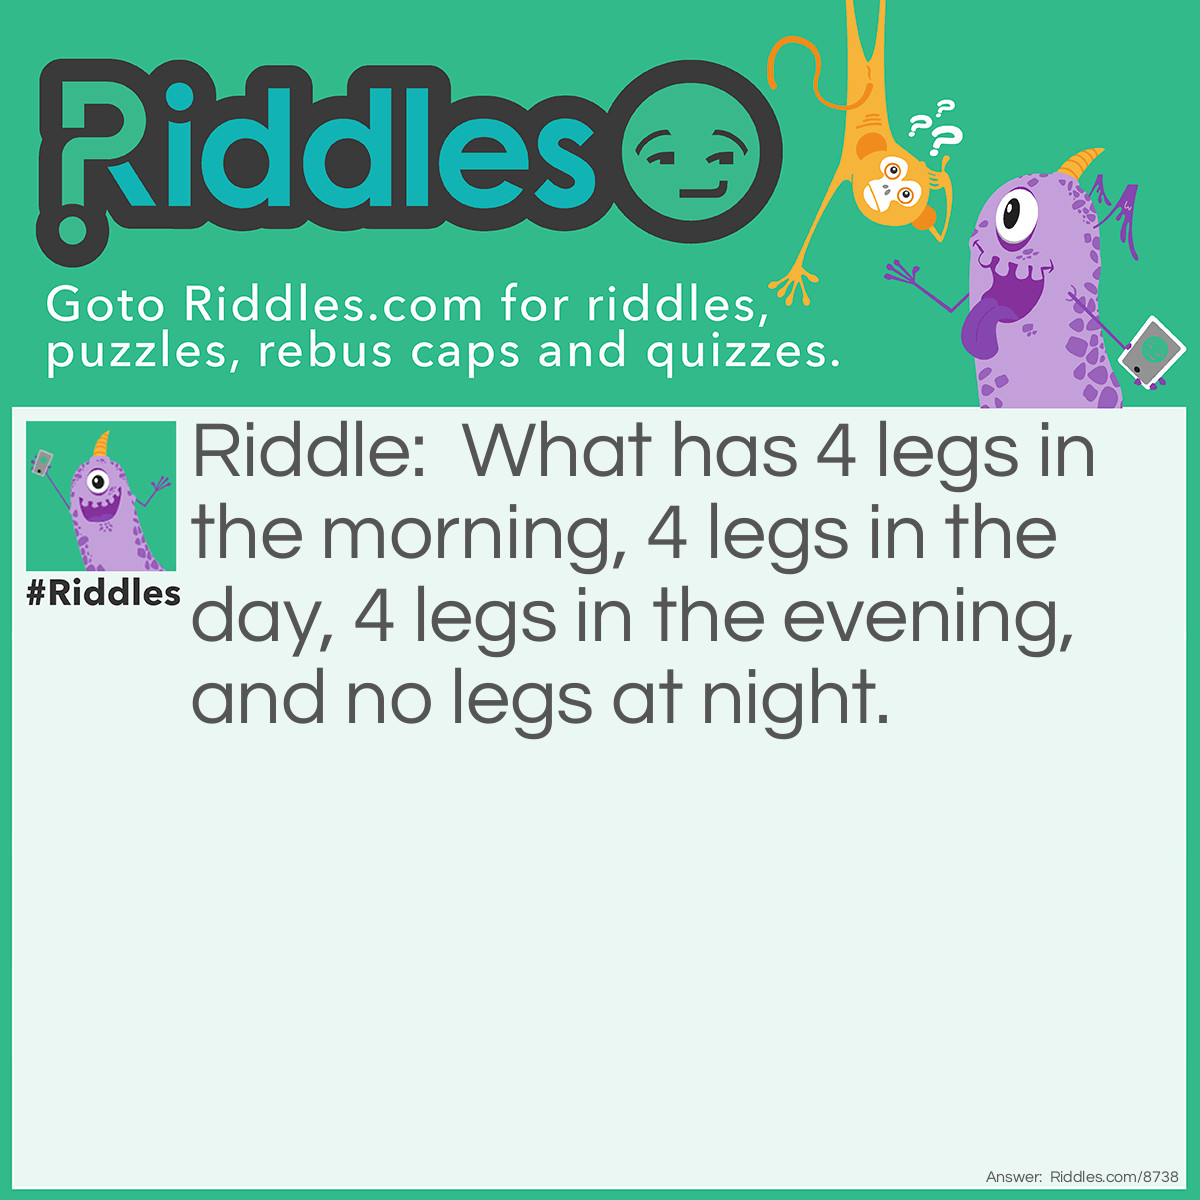 Riddle: What has 4 legs in the morning, 4 legs in the day, 4 legs in the evening, and no legs at night? Answer: A horse. It had a lame leg and got put down in the evening